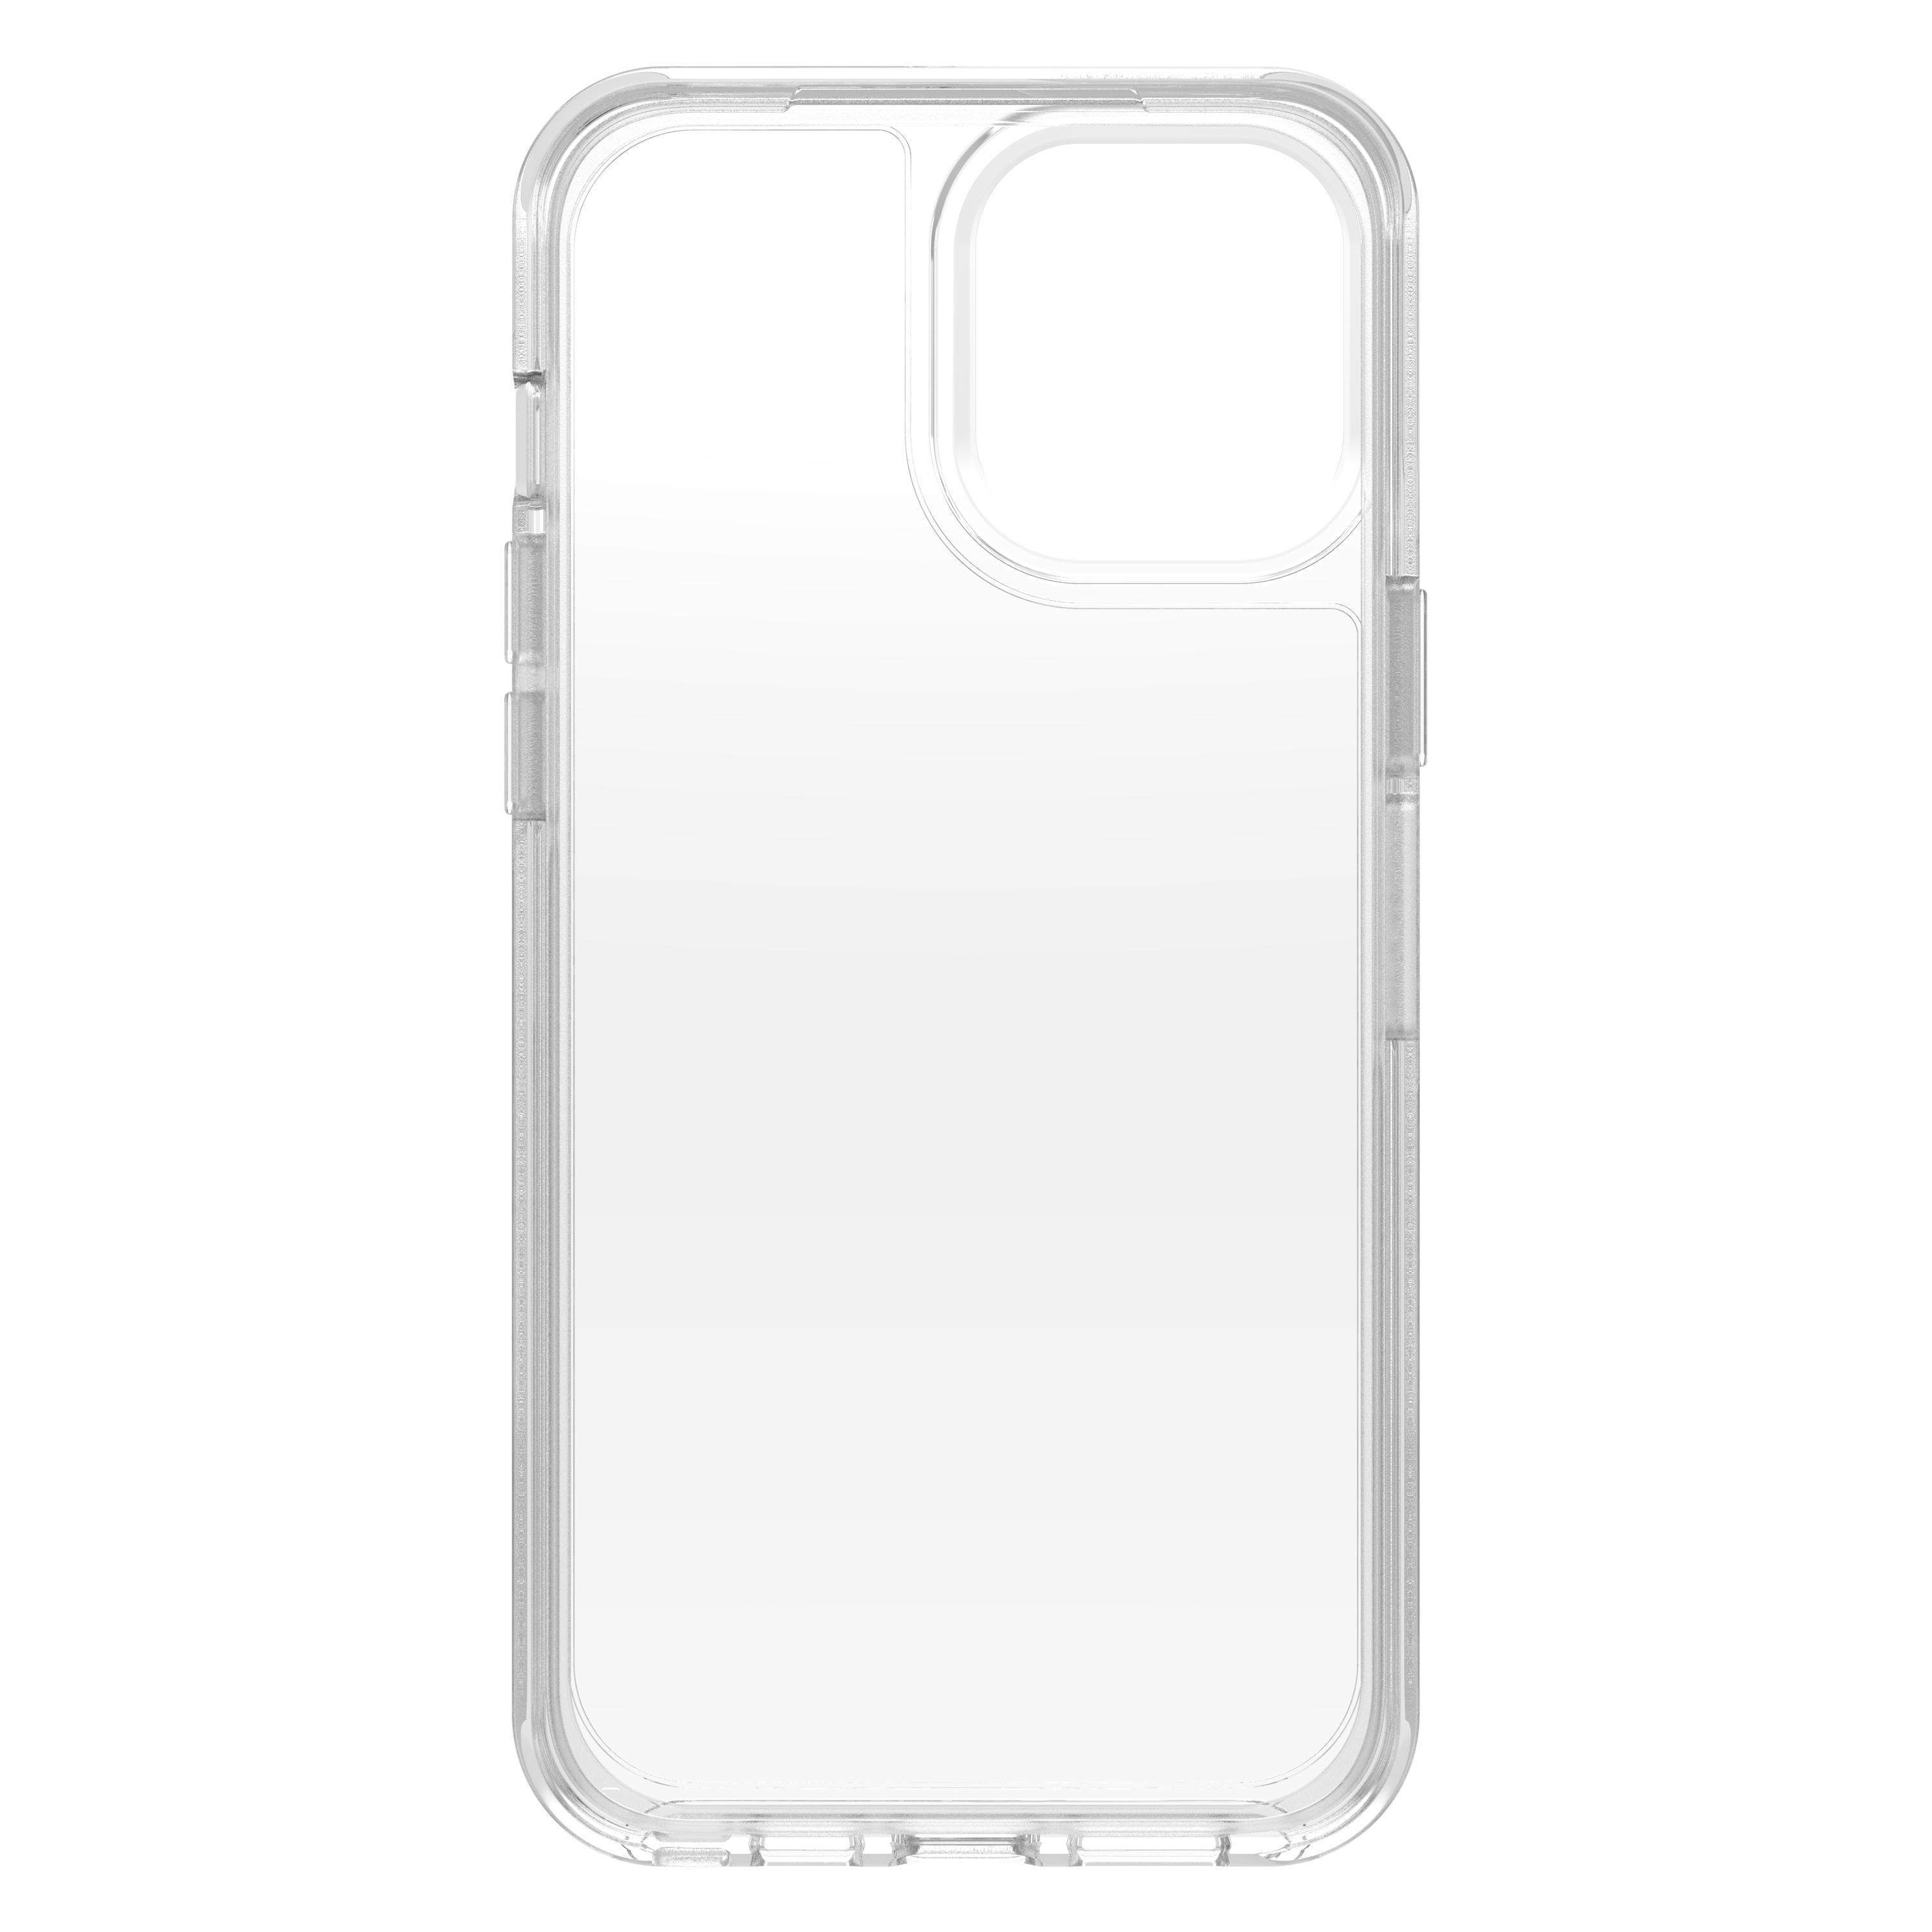 Pro + 12 OTTERBOX Transparent Apple, Symmetry Backcover, Max, iPhone Glass, Clear Alpha